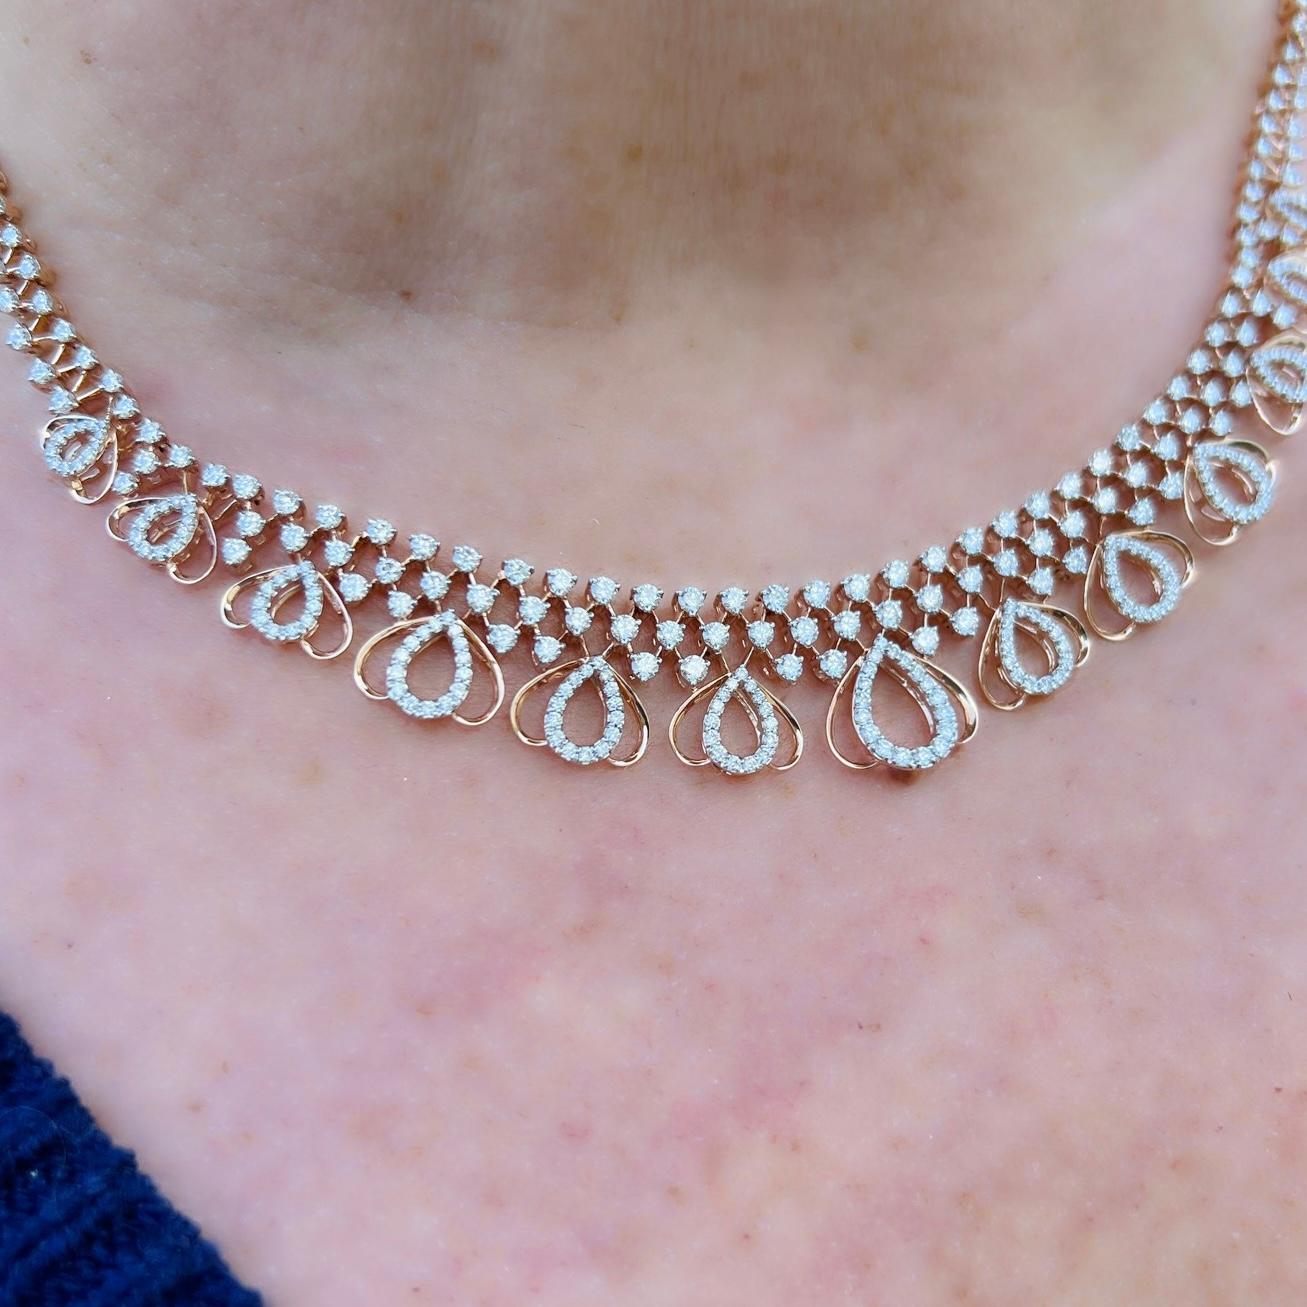 An absolute beauty! This 18 karat rose gold choker necklace features 286 sparkling white diamonds weighing a total of approximately 3.72 carats. The unique design features an X cross pattern design with multiple tear drop designs suspended from the